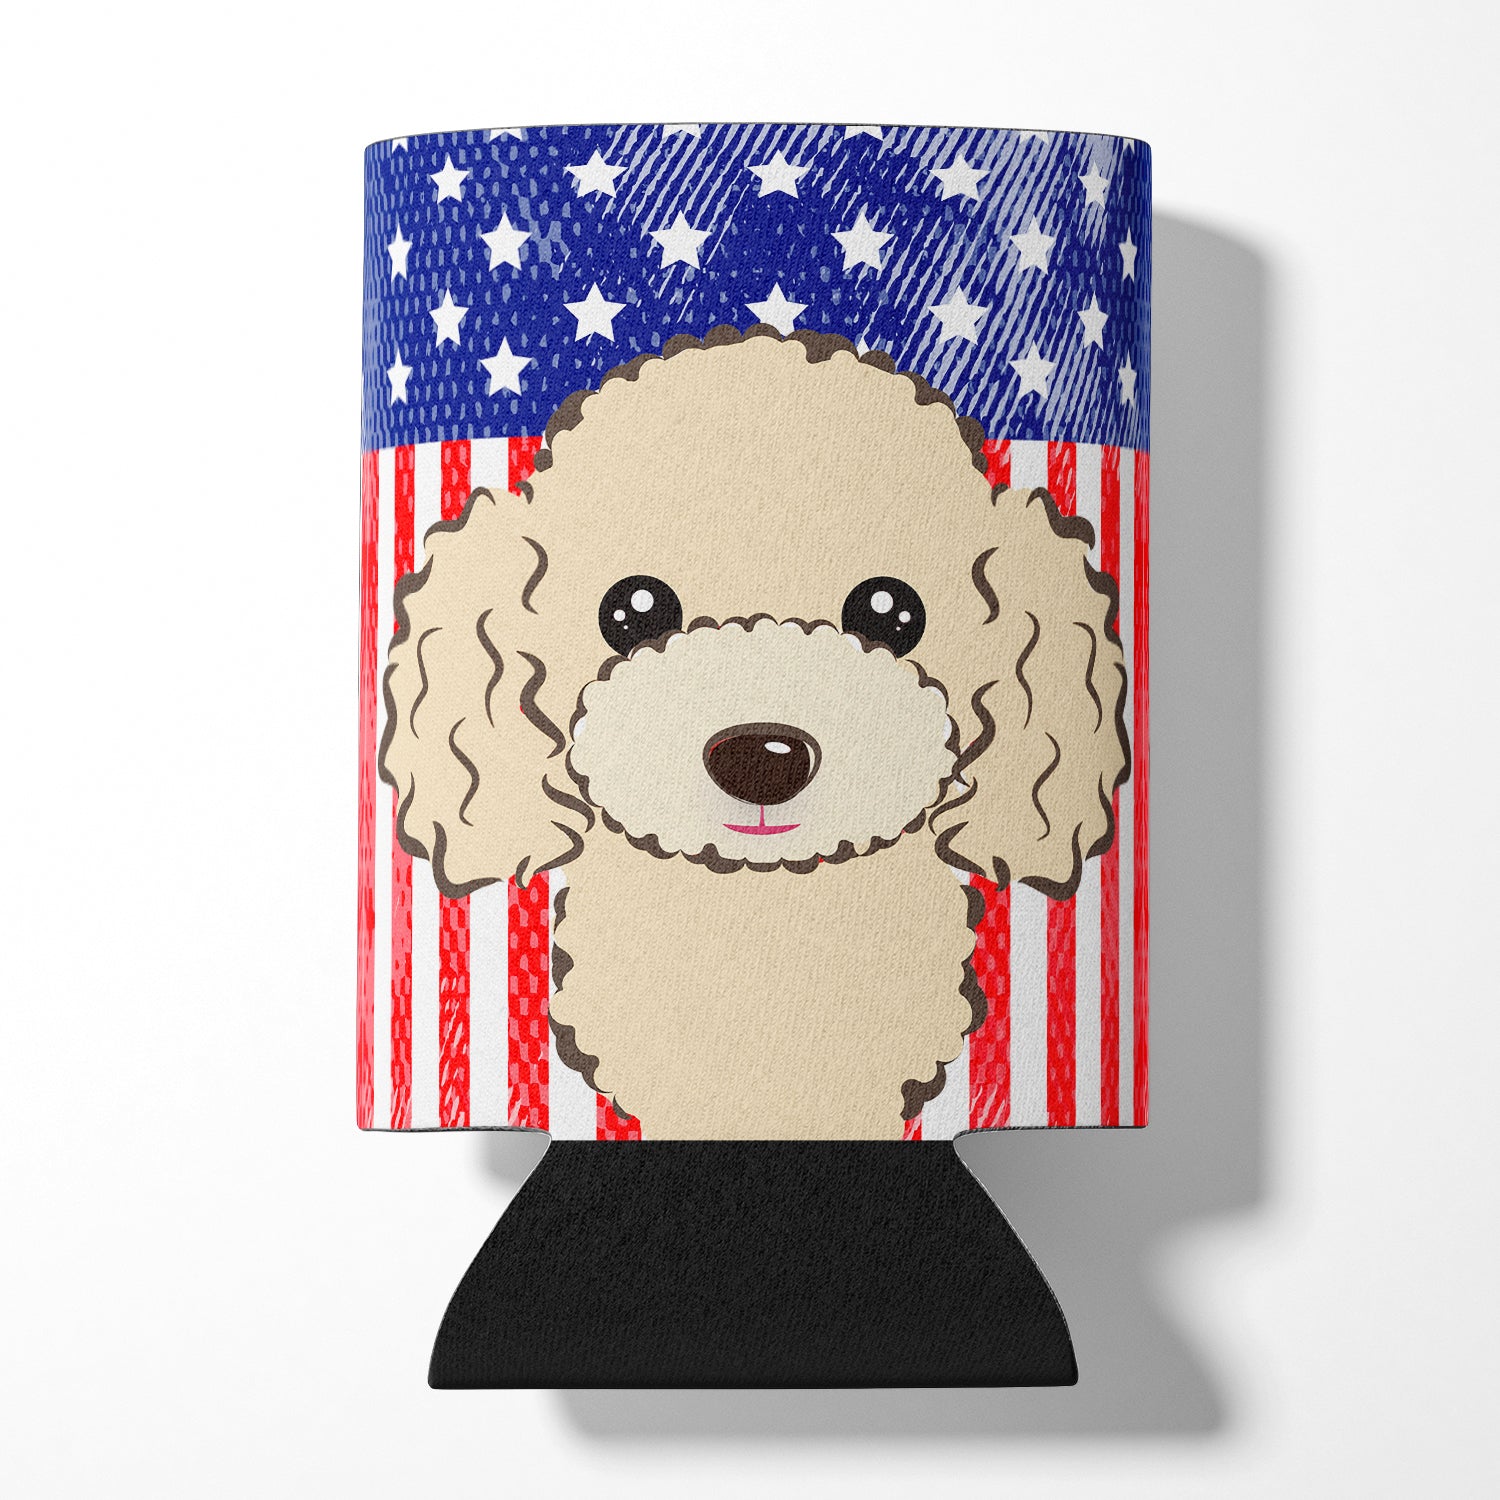 American Flag and Buff Poodle Can or Bottle Hugger BB2188CC.